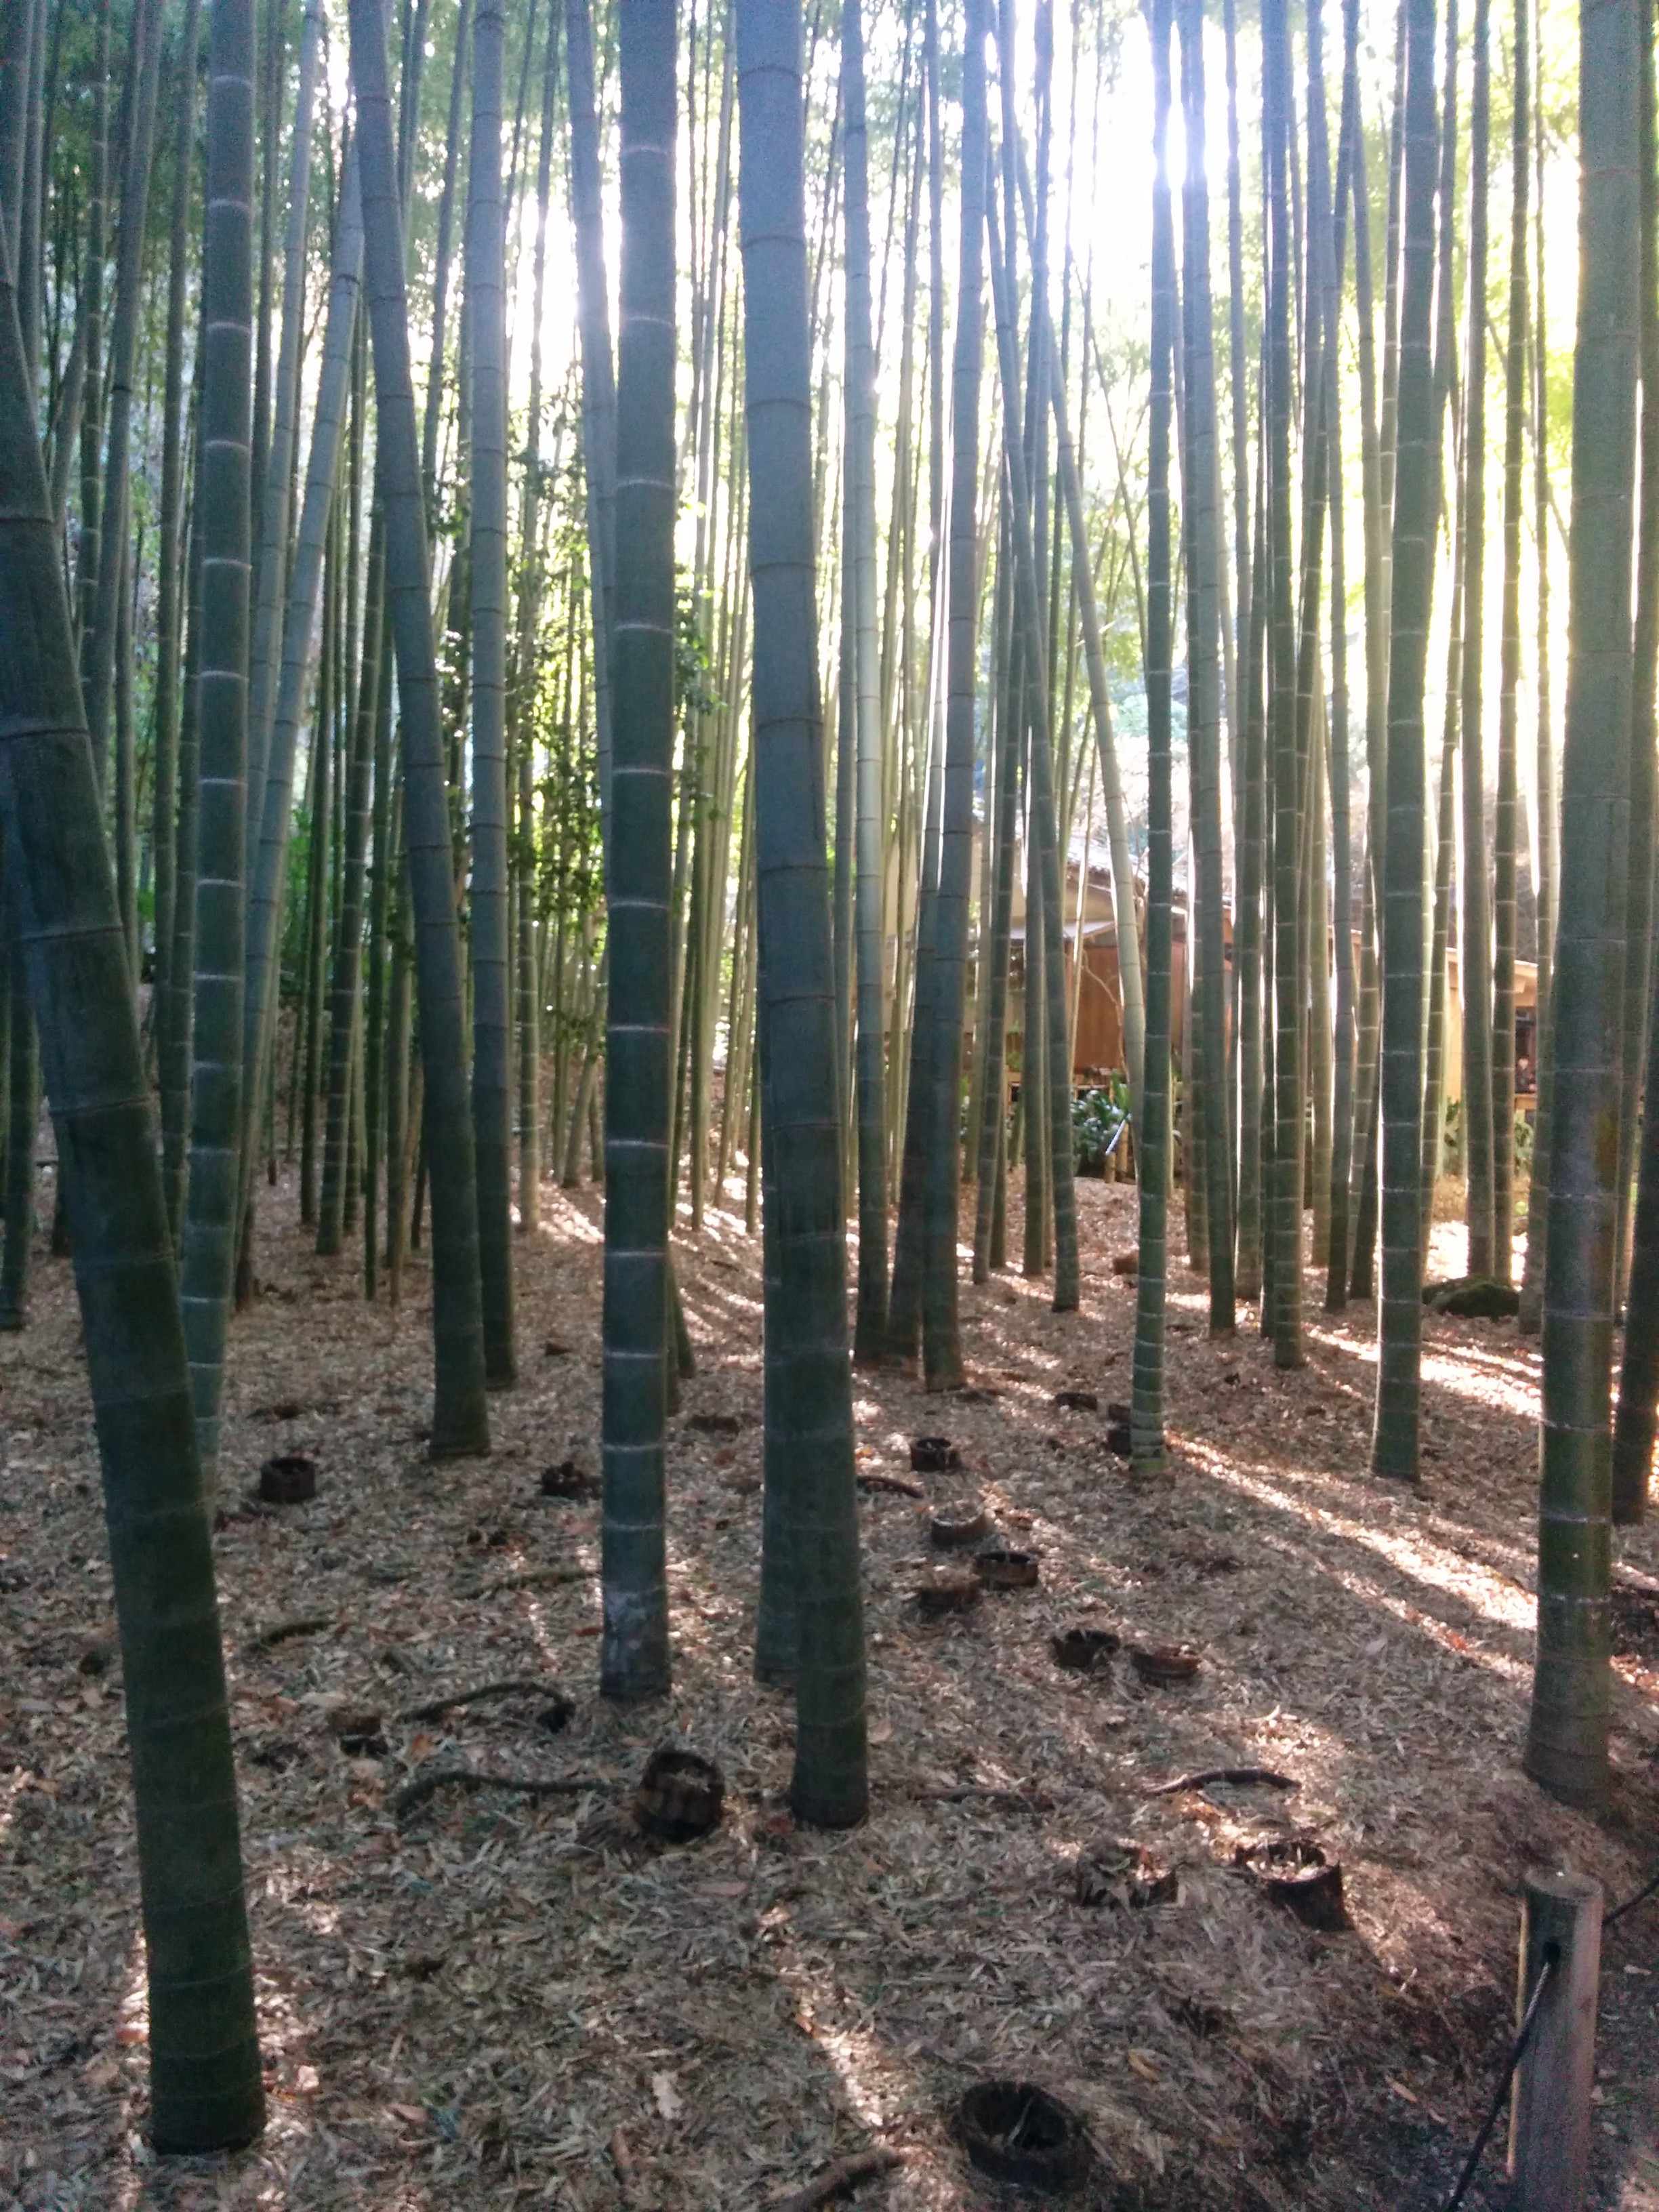 A field of bamboo